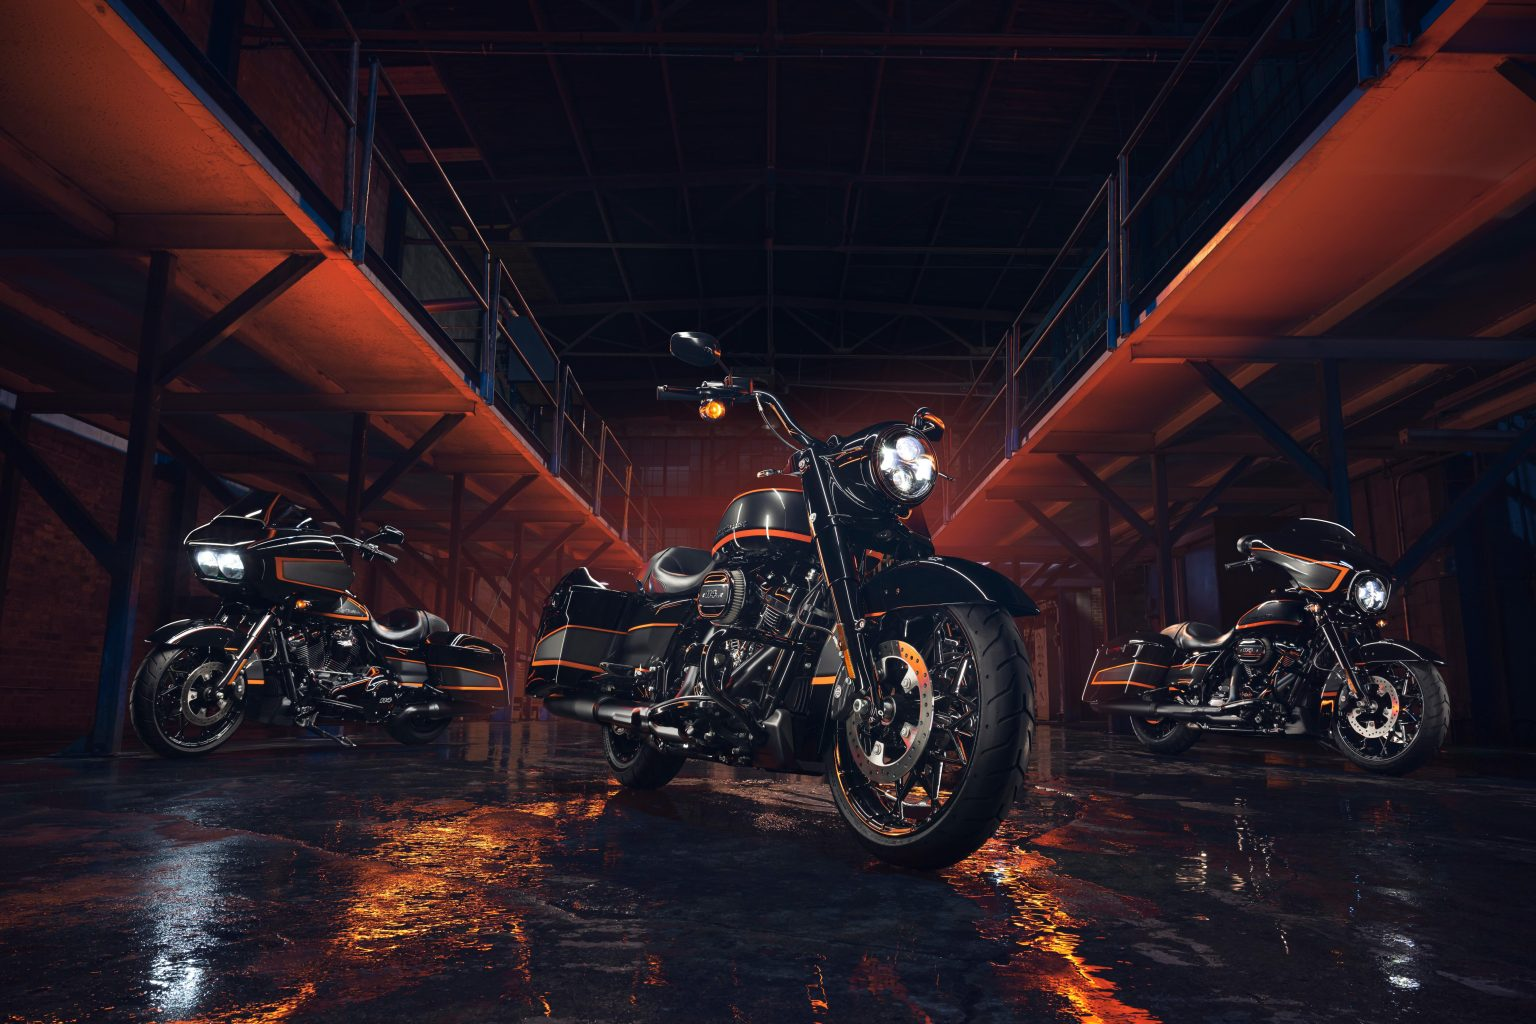 Harley-Davidson® unveils motorcycles with the latest factory custom Apex color options, exclusive to motorcycles. Selected Harley-Davidson® Grand American Touring family models at the Sturgis Motorcycle Rally, with new color and graphics options. Inspired by the long successful racing history of Harley-Davidson® as the best motorcycle brand in the world. With centuries of racing legends beginning in the mountain, trekking, and track days, the Harley-Davidson® Screamin' Eagle® team retains their title at the MotoAmerica King of the Baggers race in 2021.